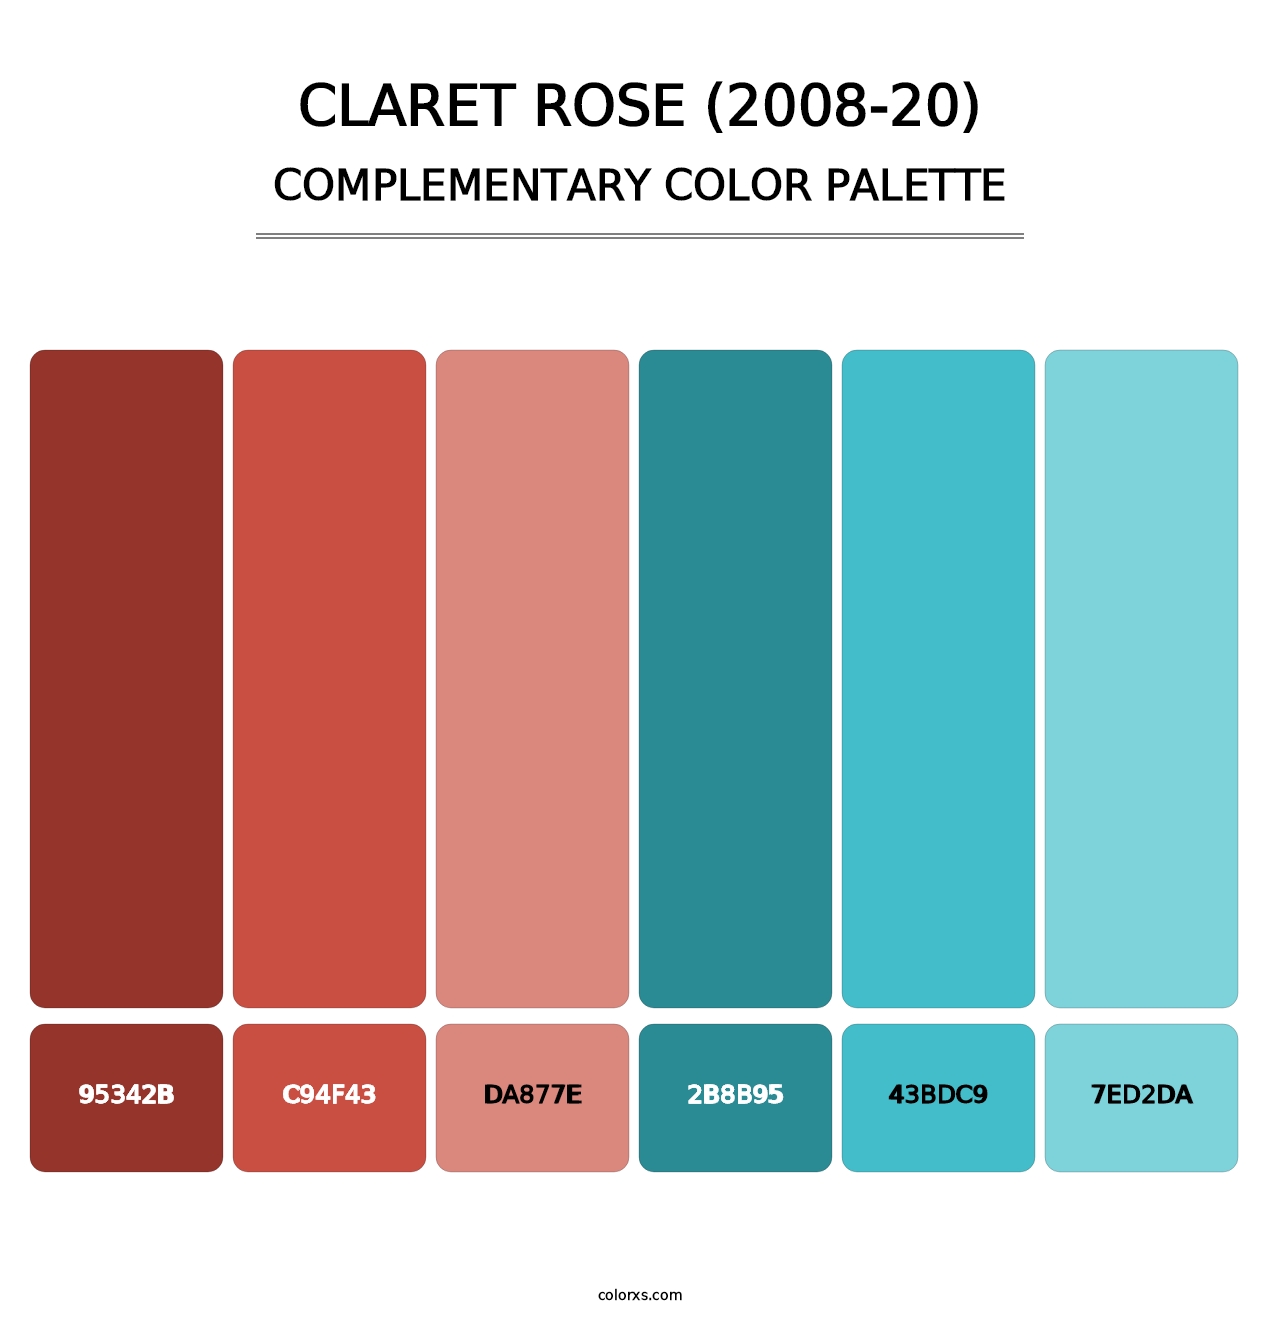 Claret Rose (2008-20) - Complementary Color Palette